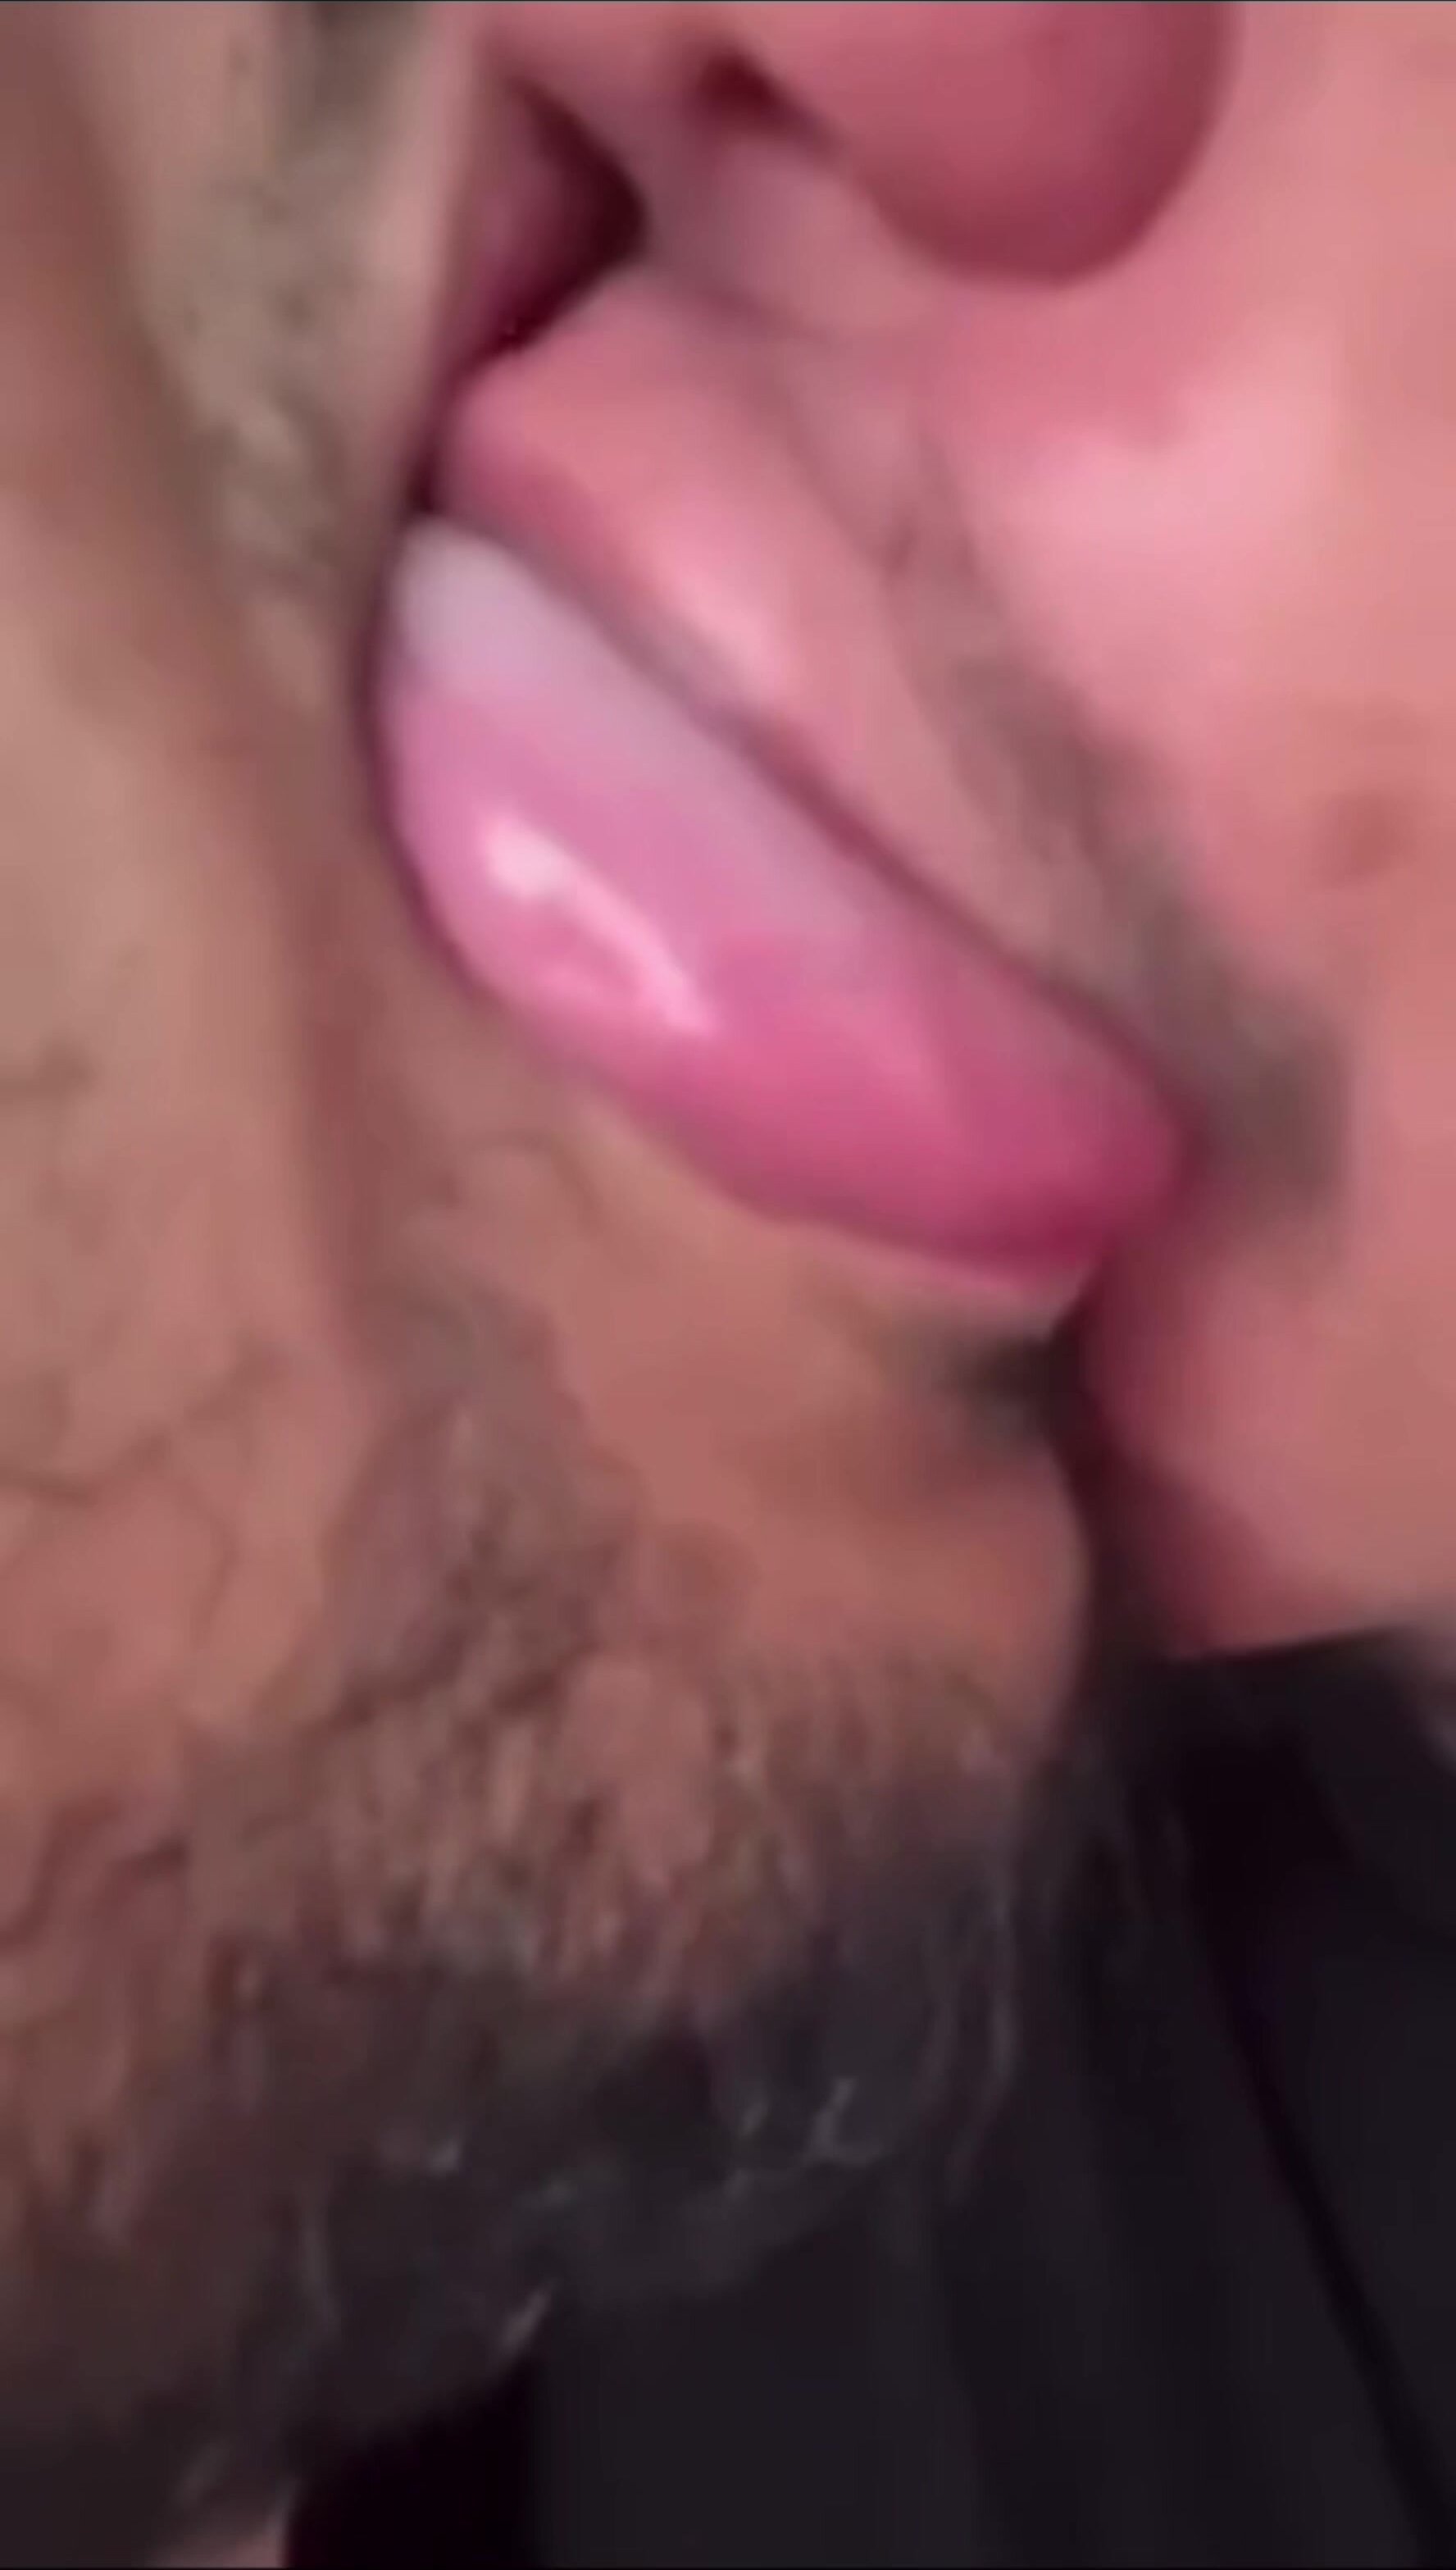 Tongue Licking with Neighbor